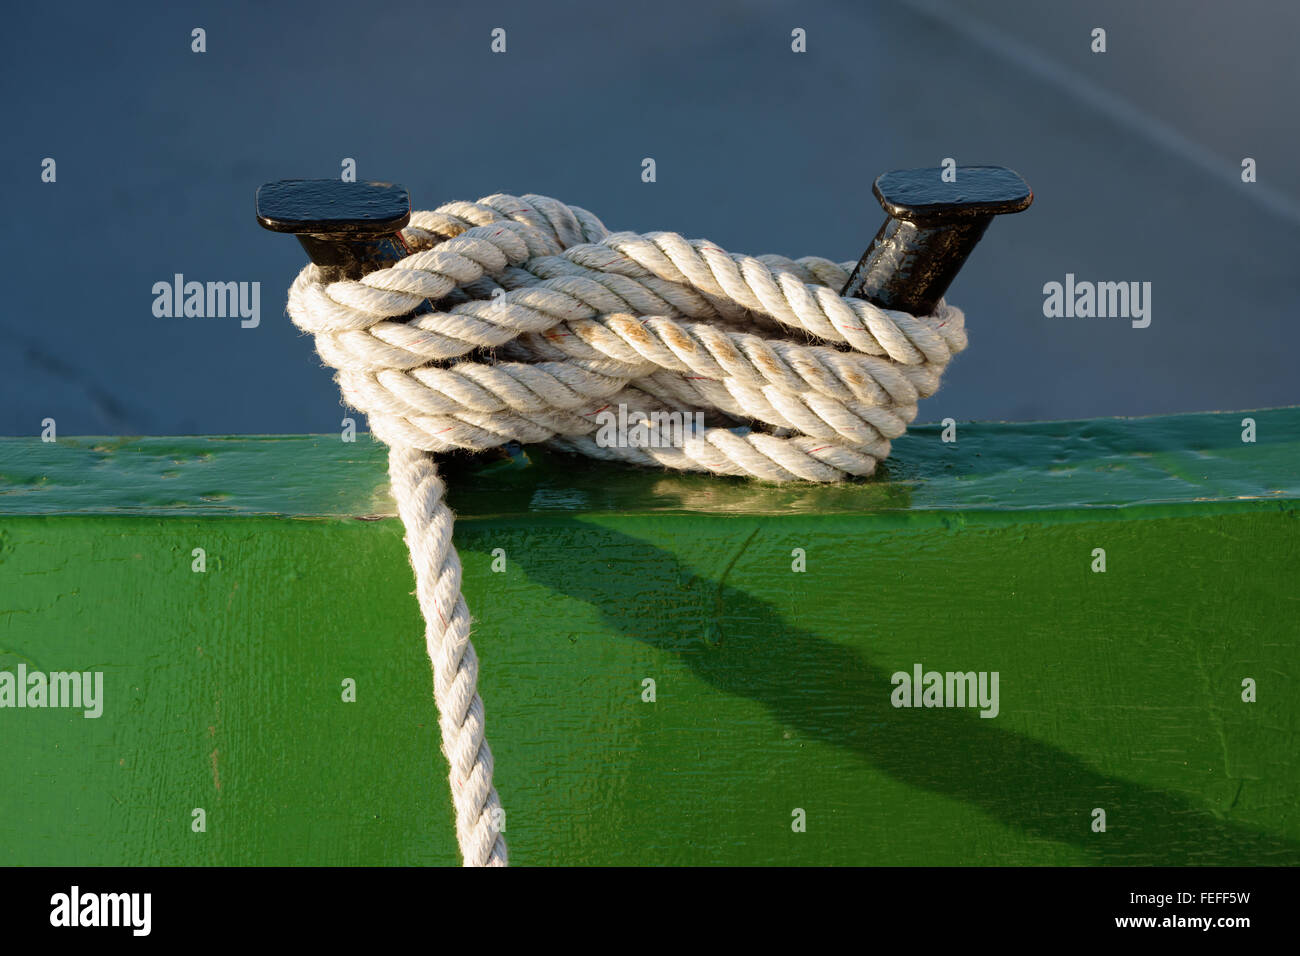 Detail of a white rope tied to a black metal anchor point on a